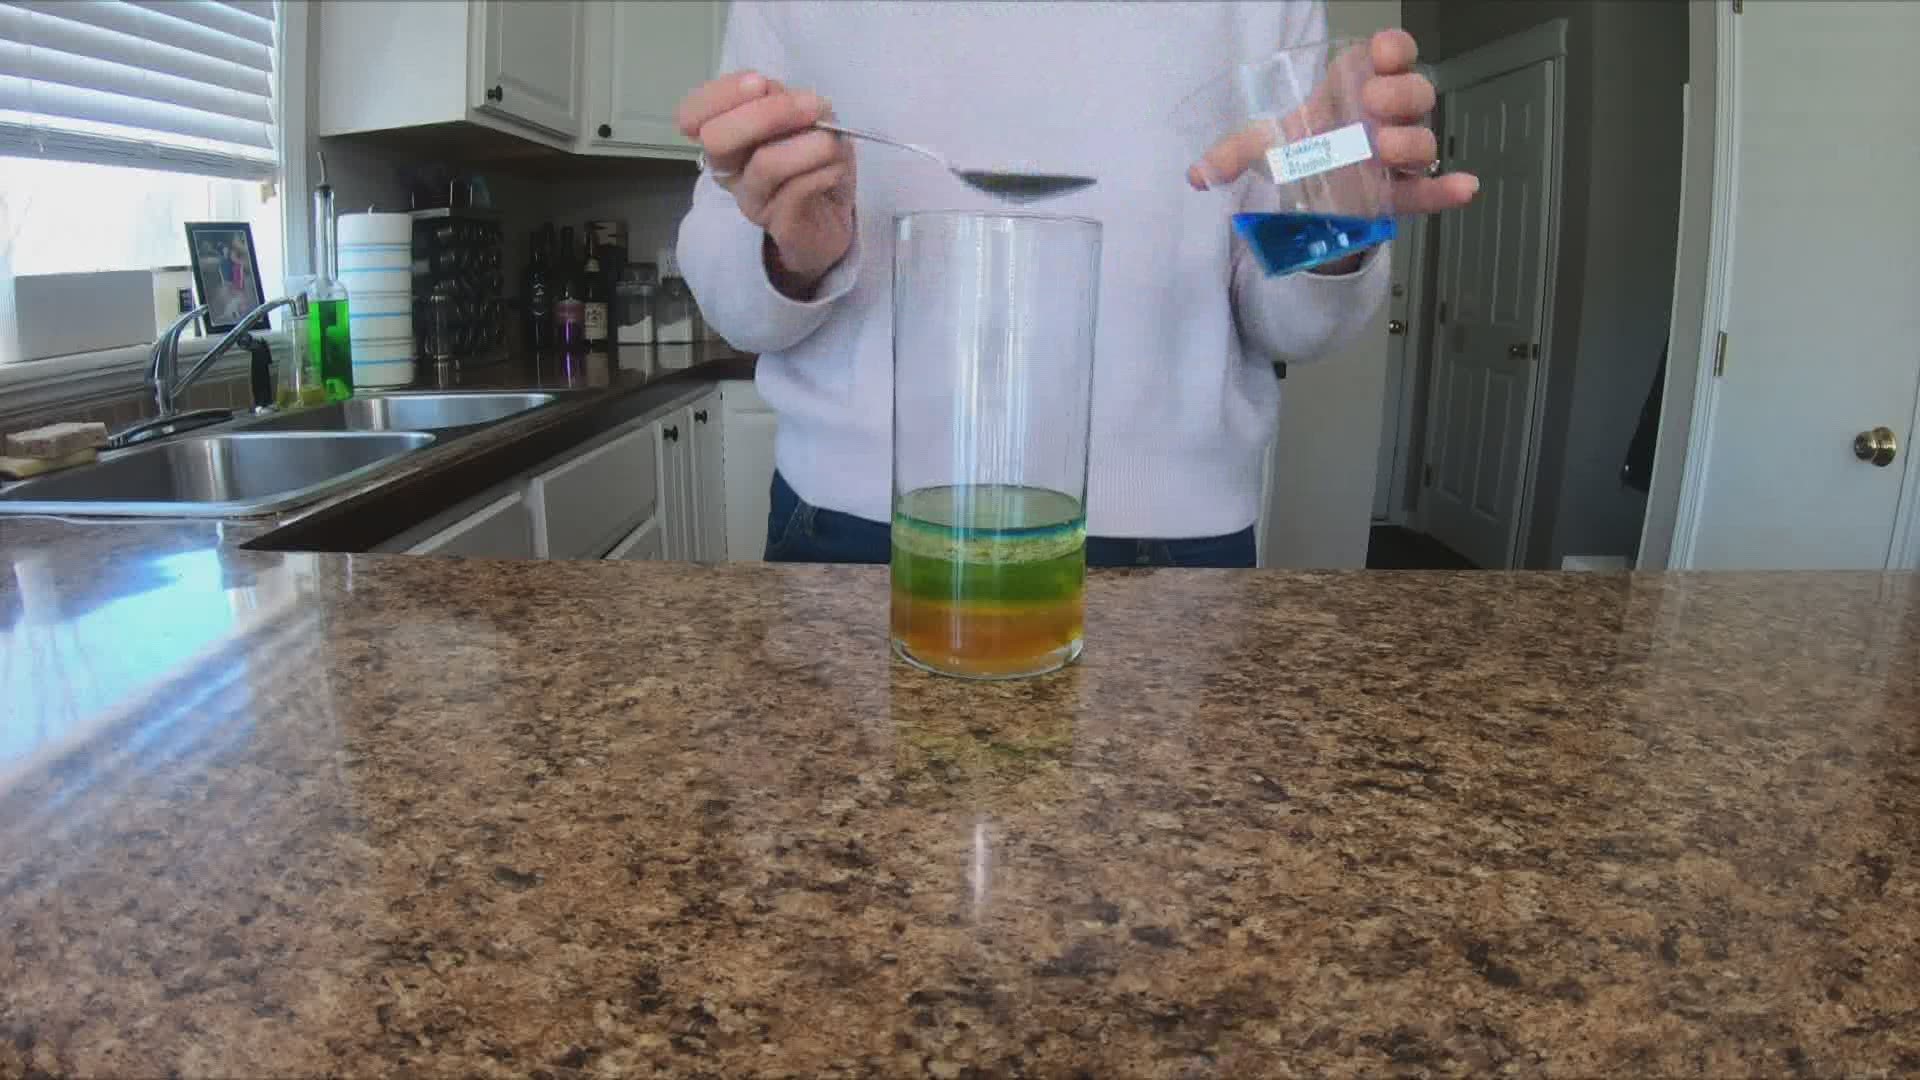 This experiment works because each liquid is layered according to density.